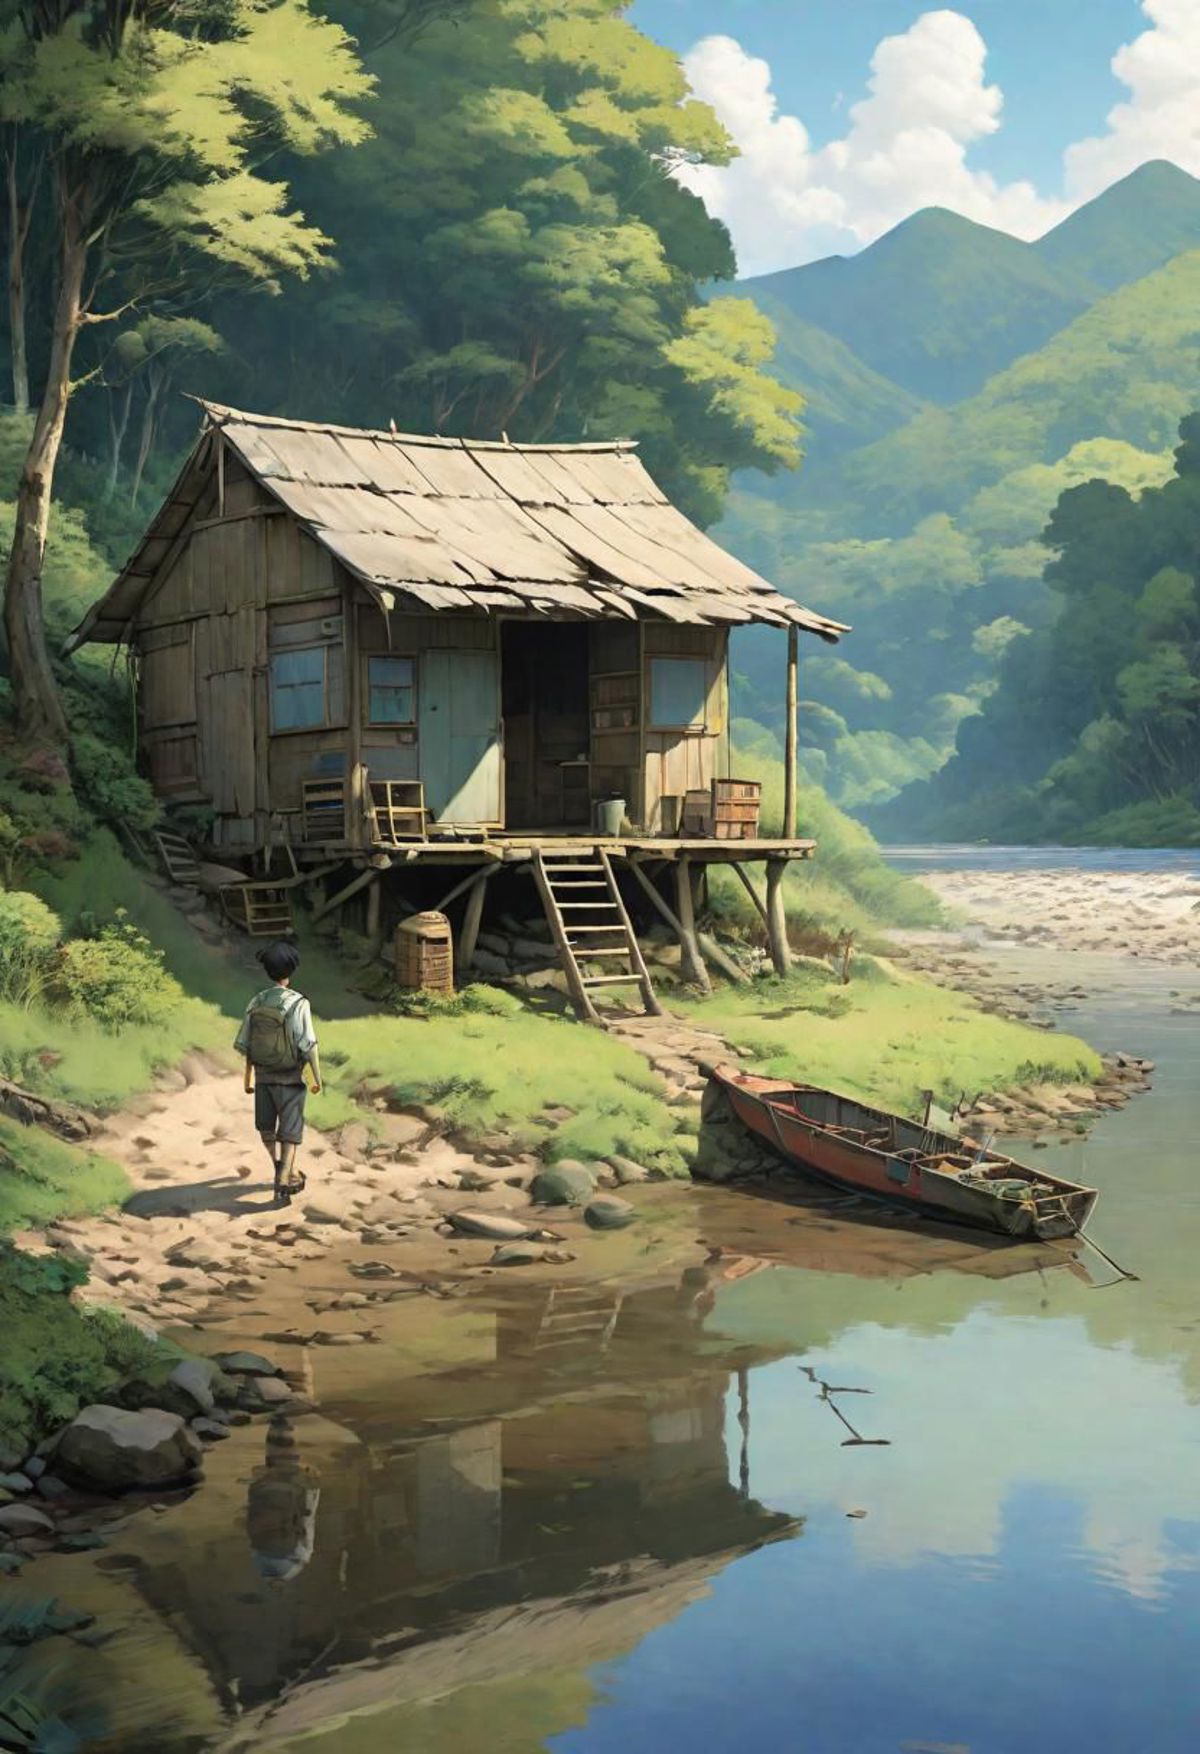 A colorful painting of a man walking towards a small wooden hut and a boat.